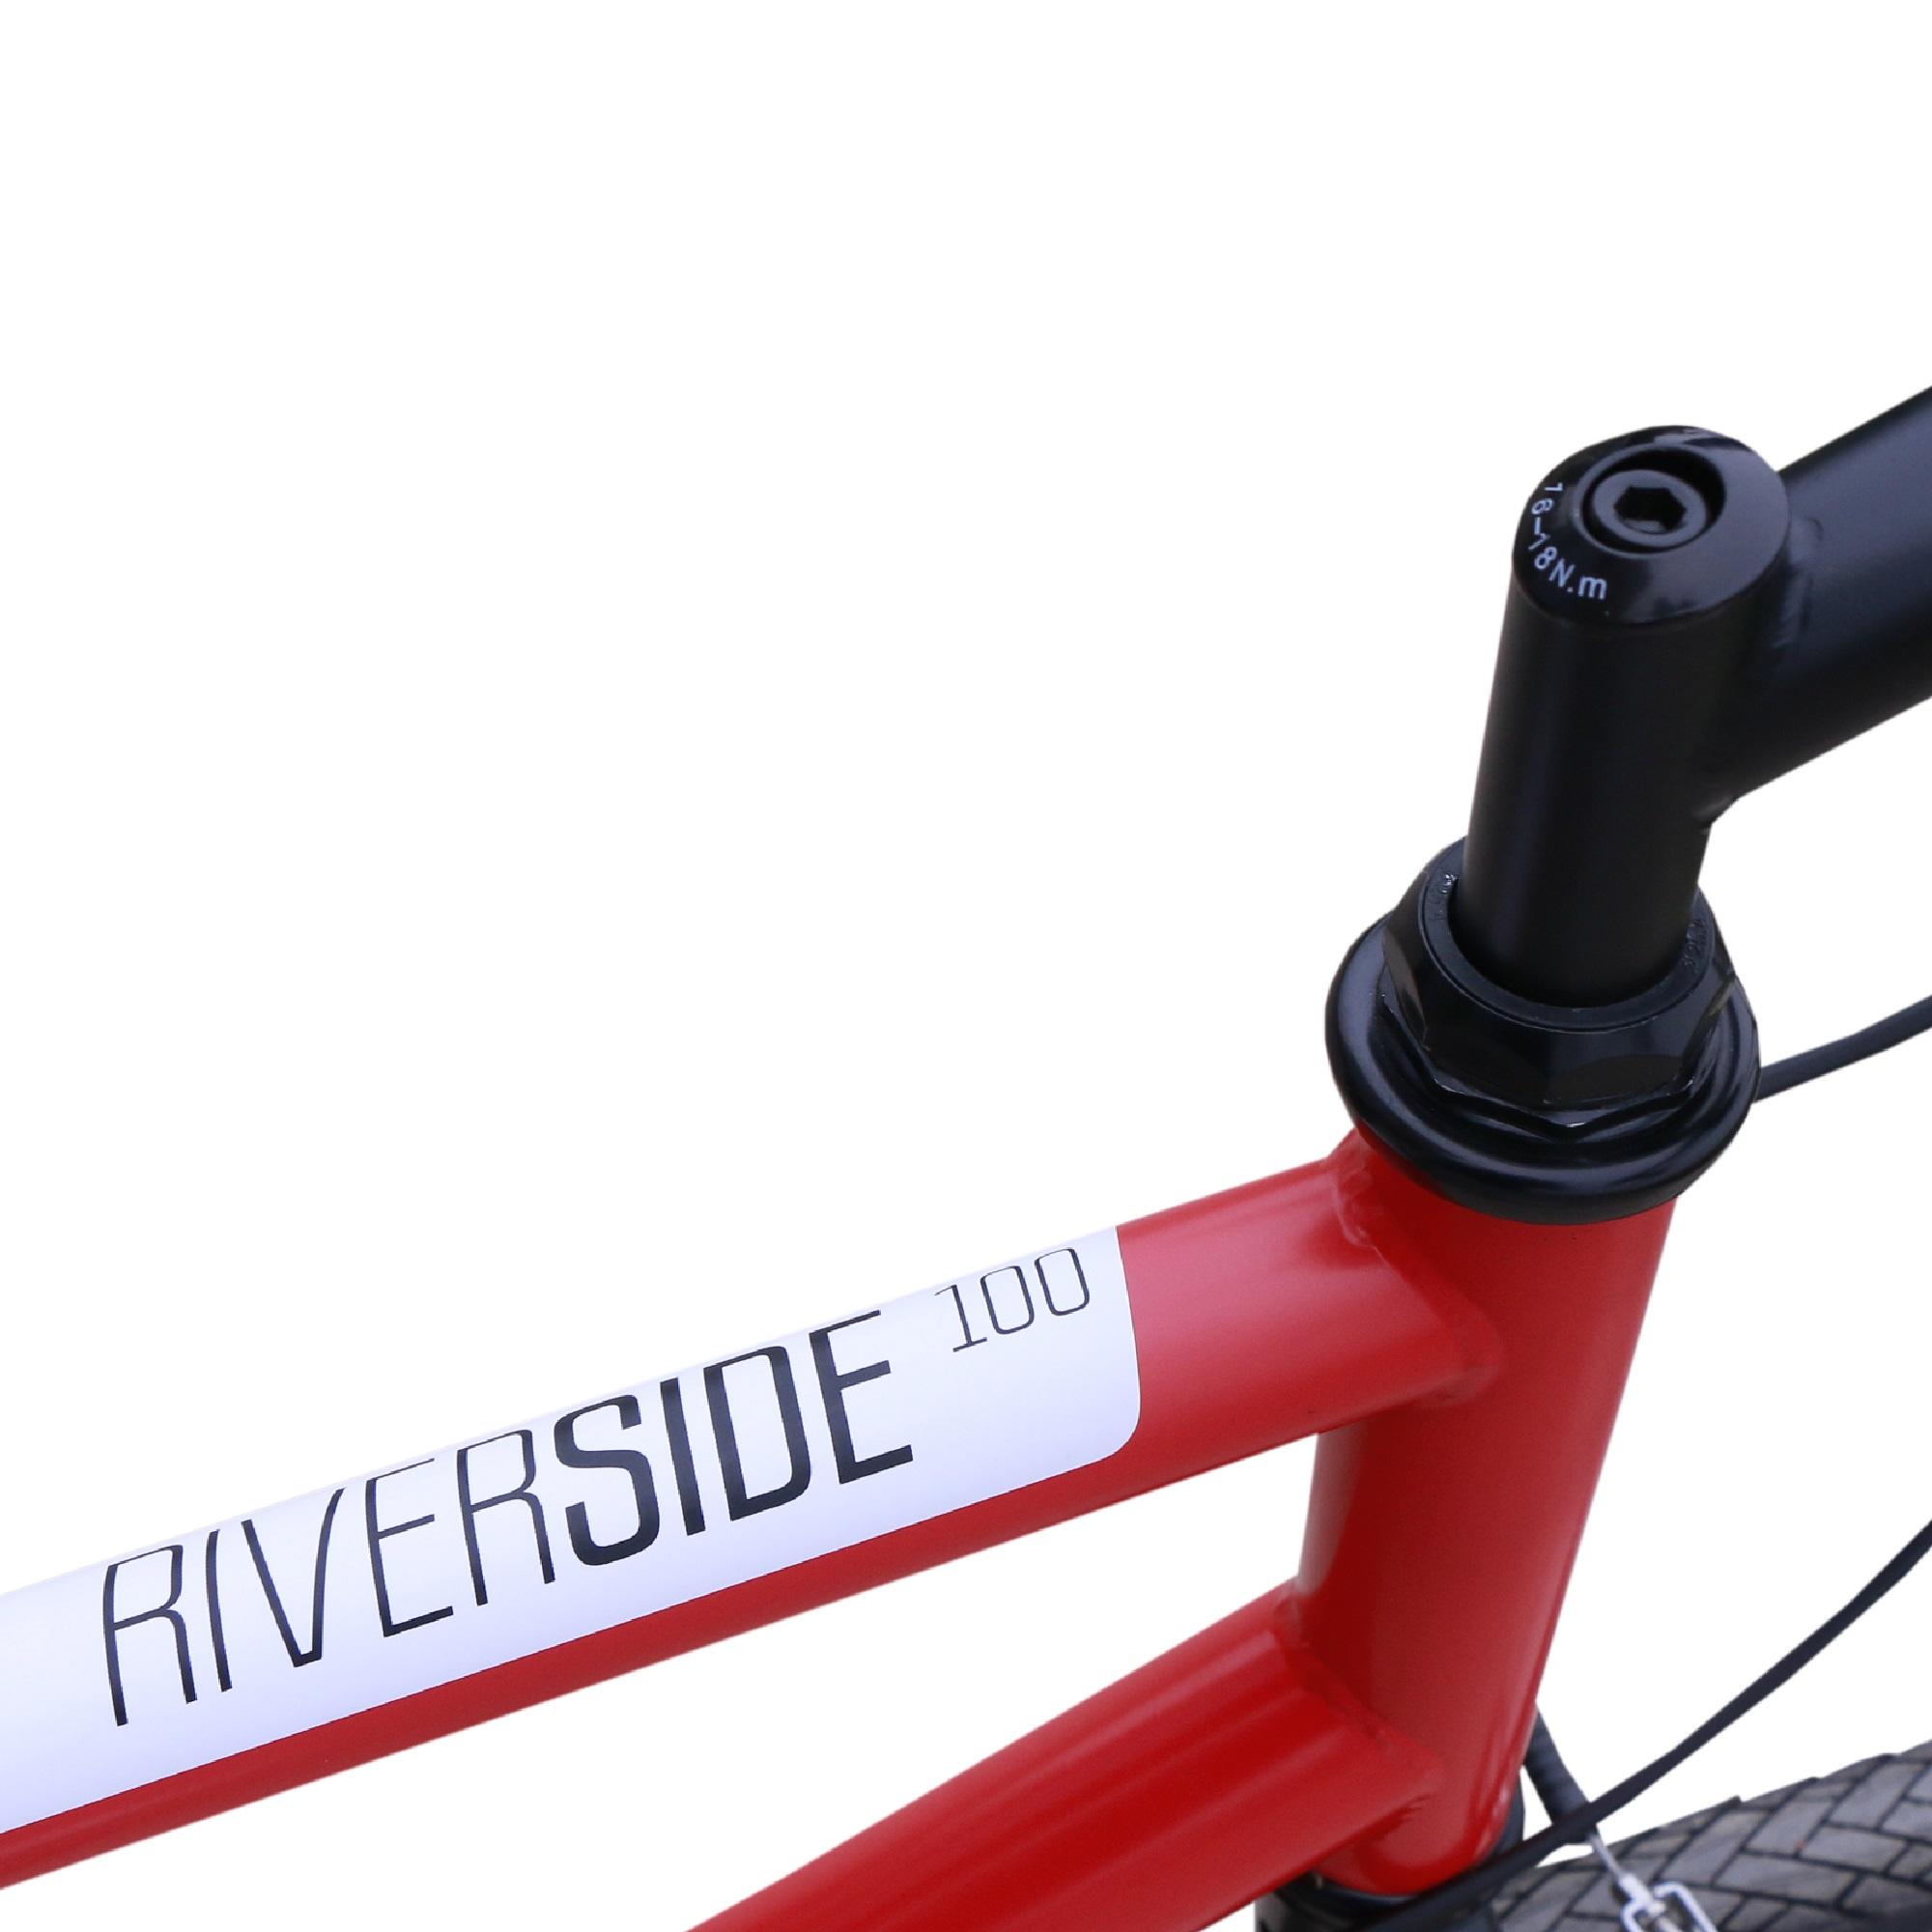 btwin riverside 100 hybrid cycle price